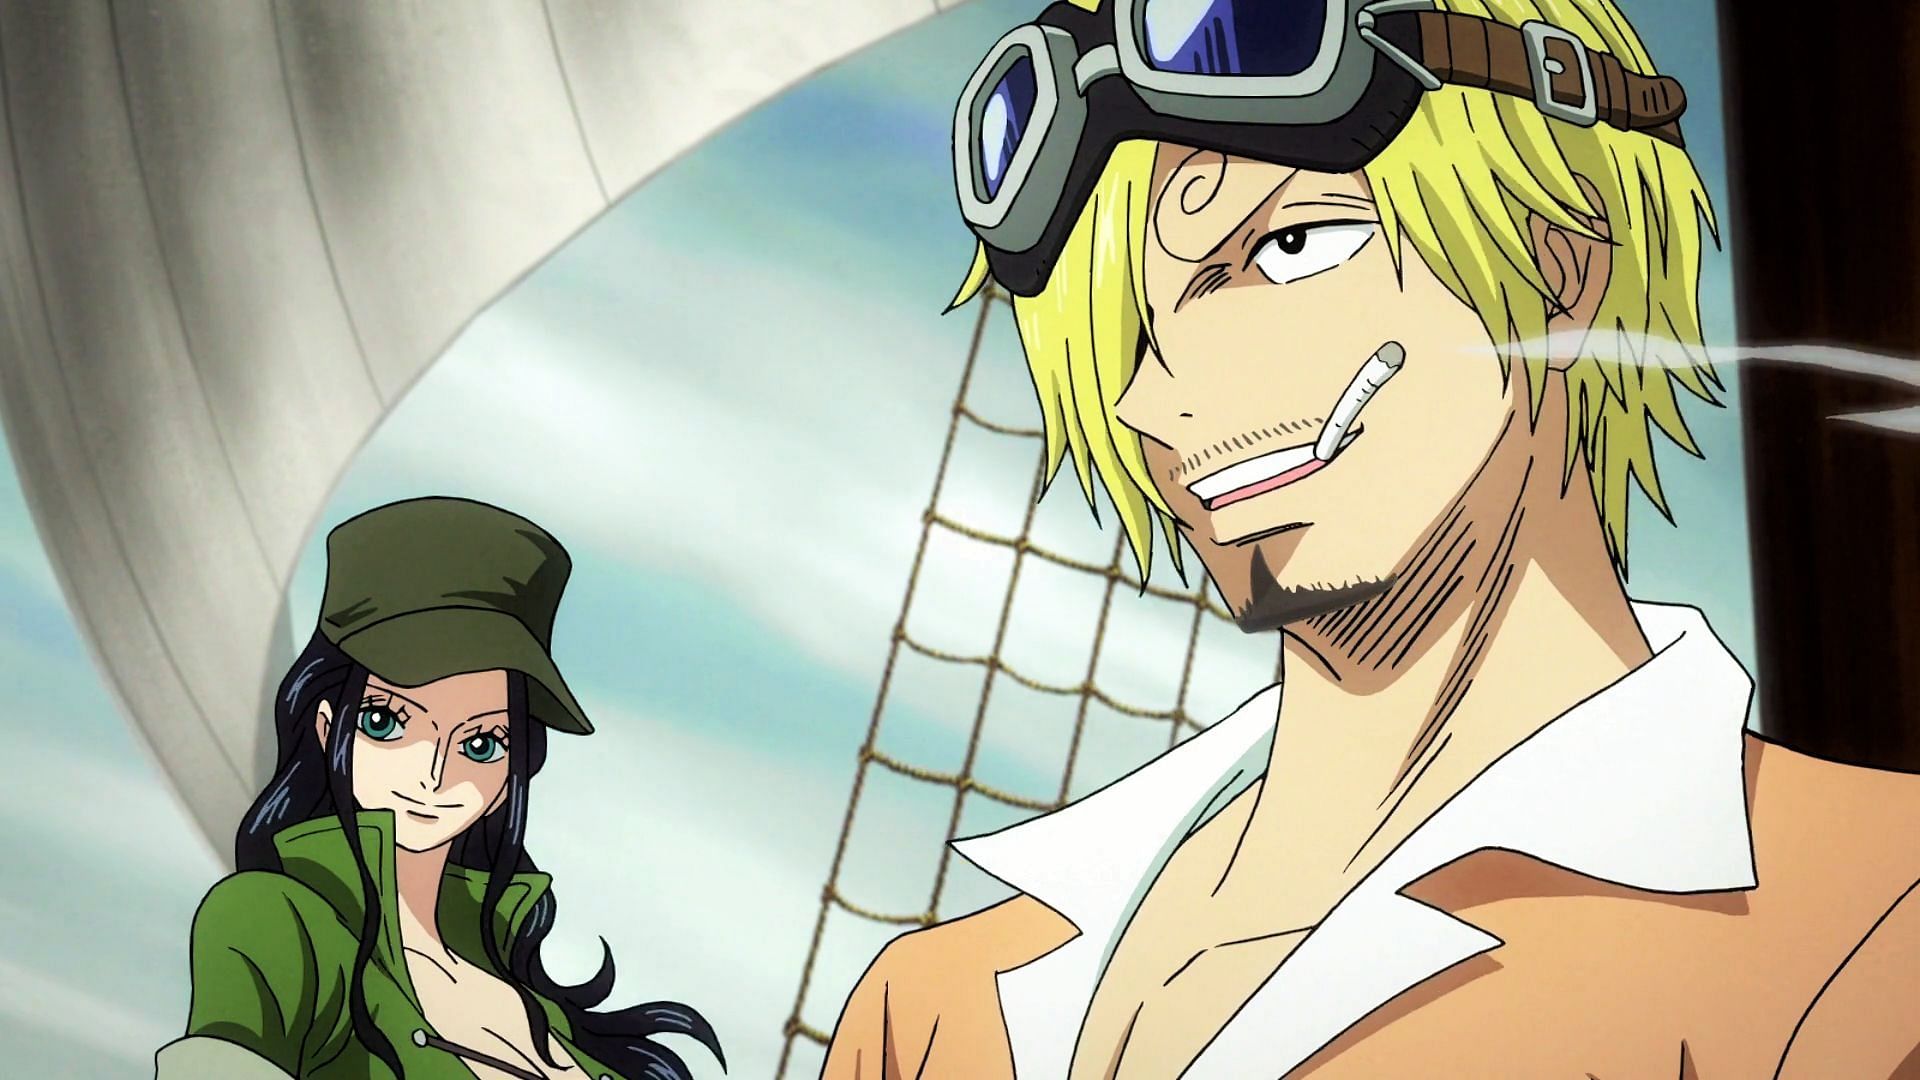 One Piece episode 1020: Sanji is in the midst of a fight. Keep in